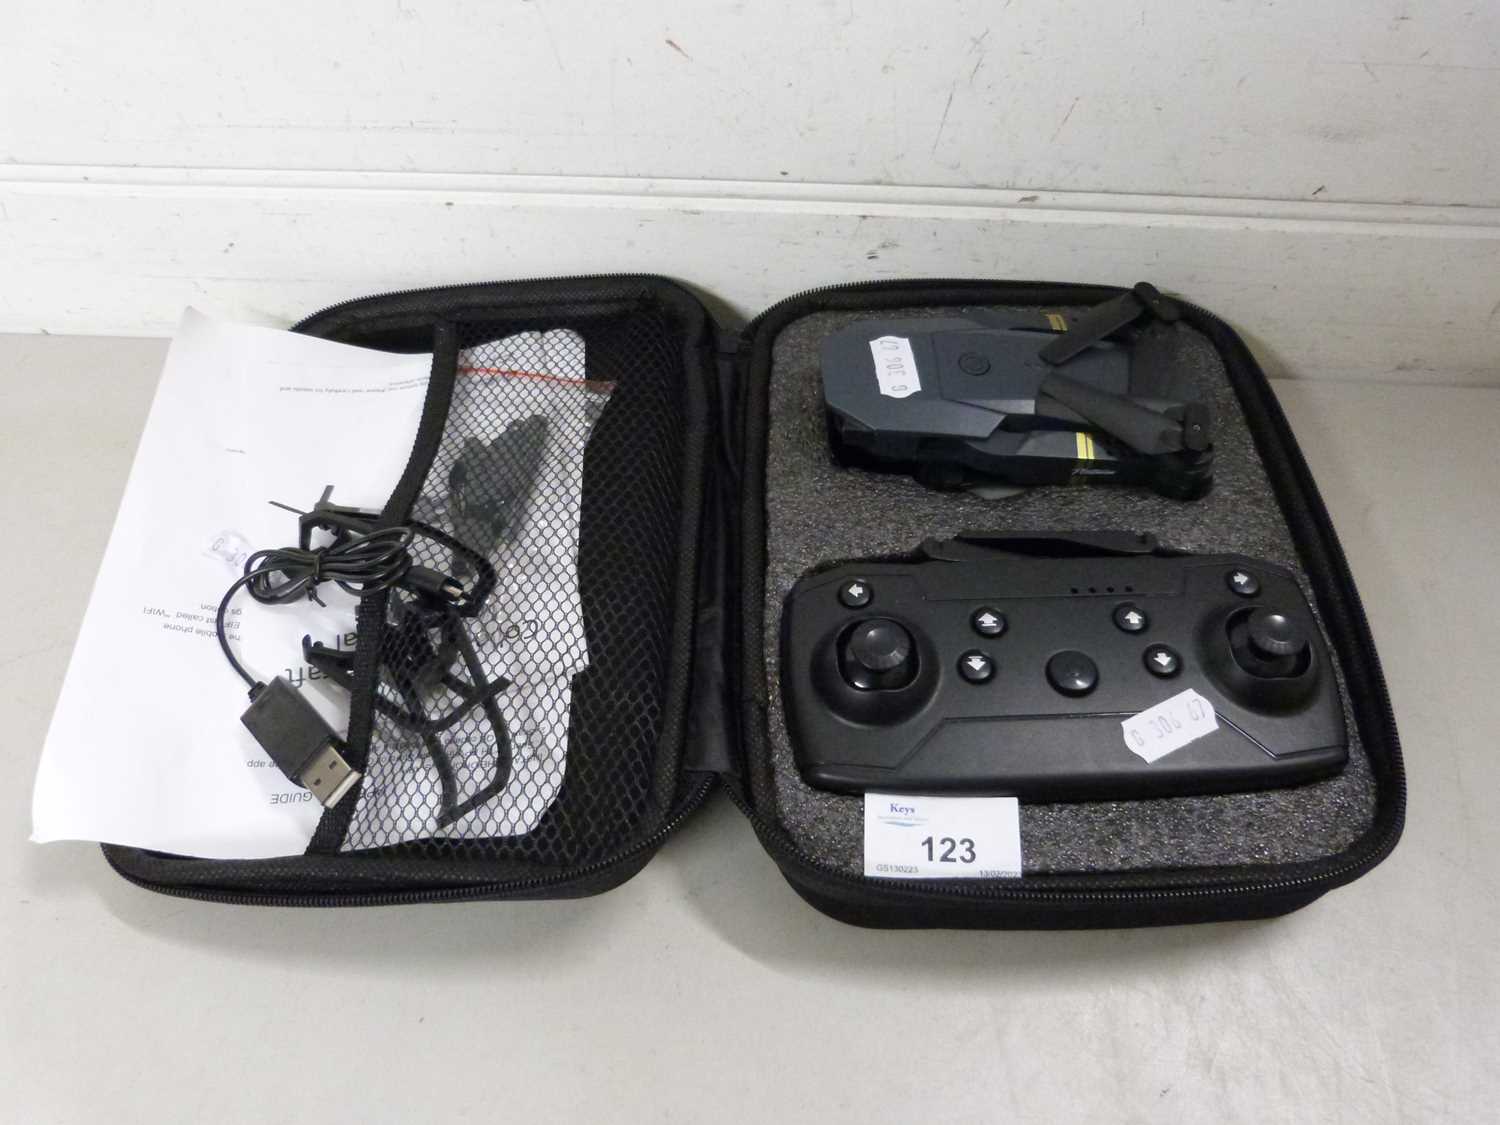 Portable drone with carry case